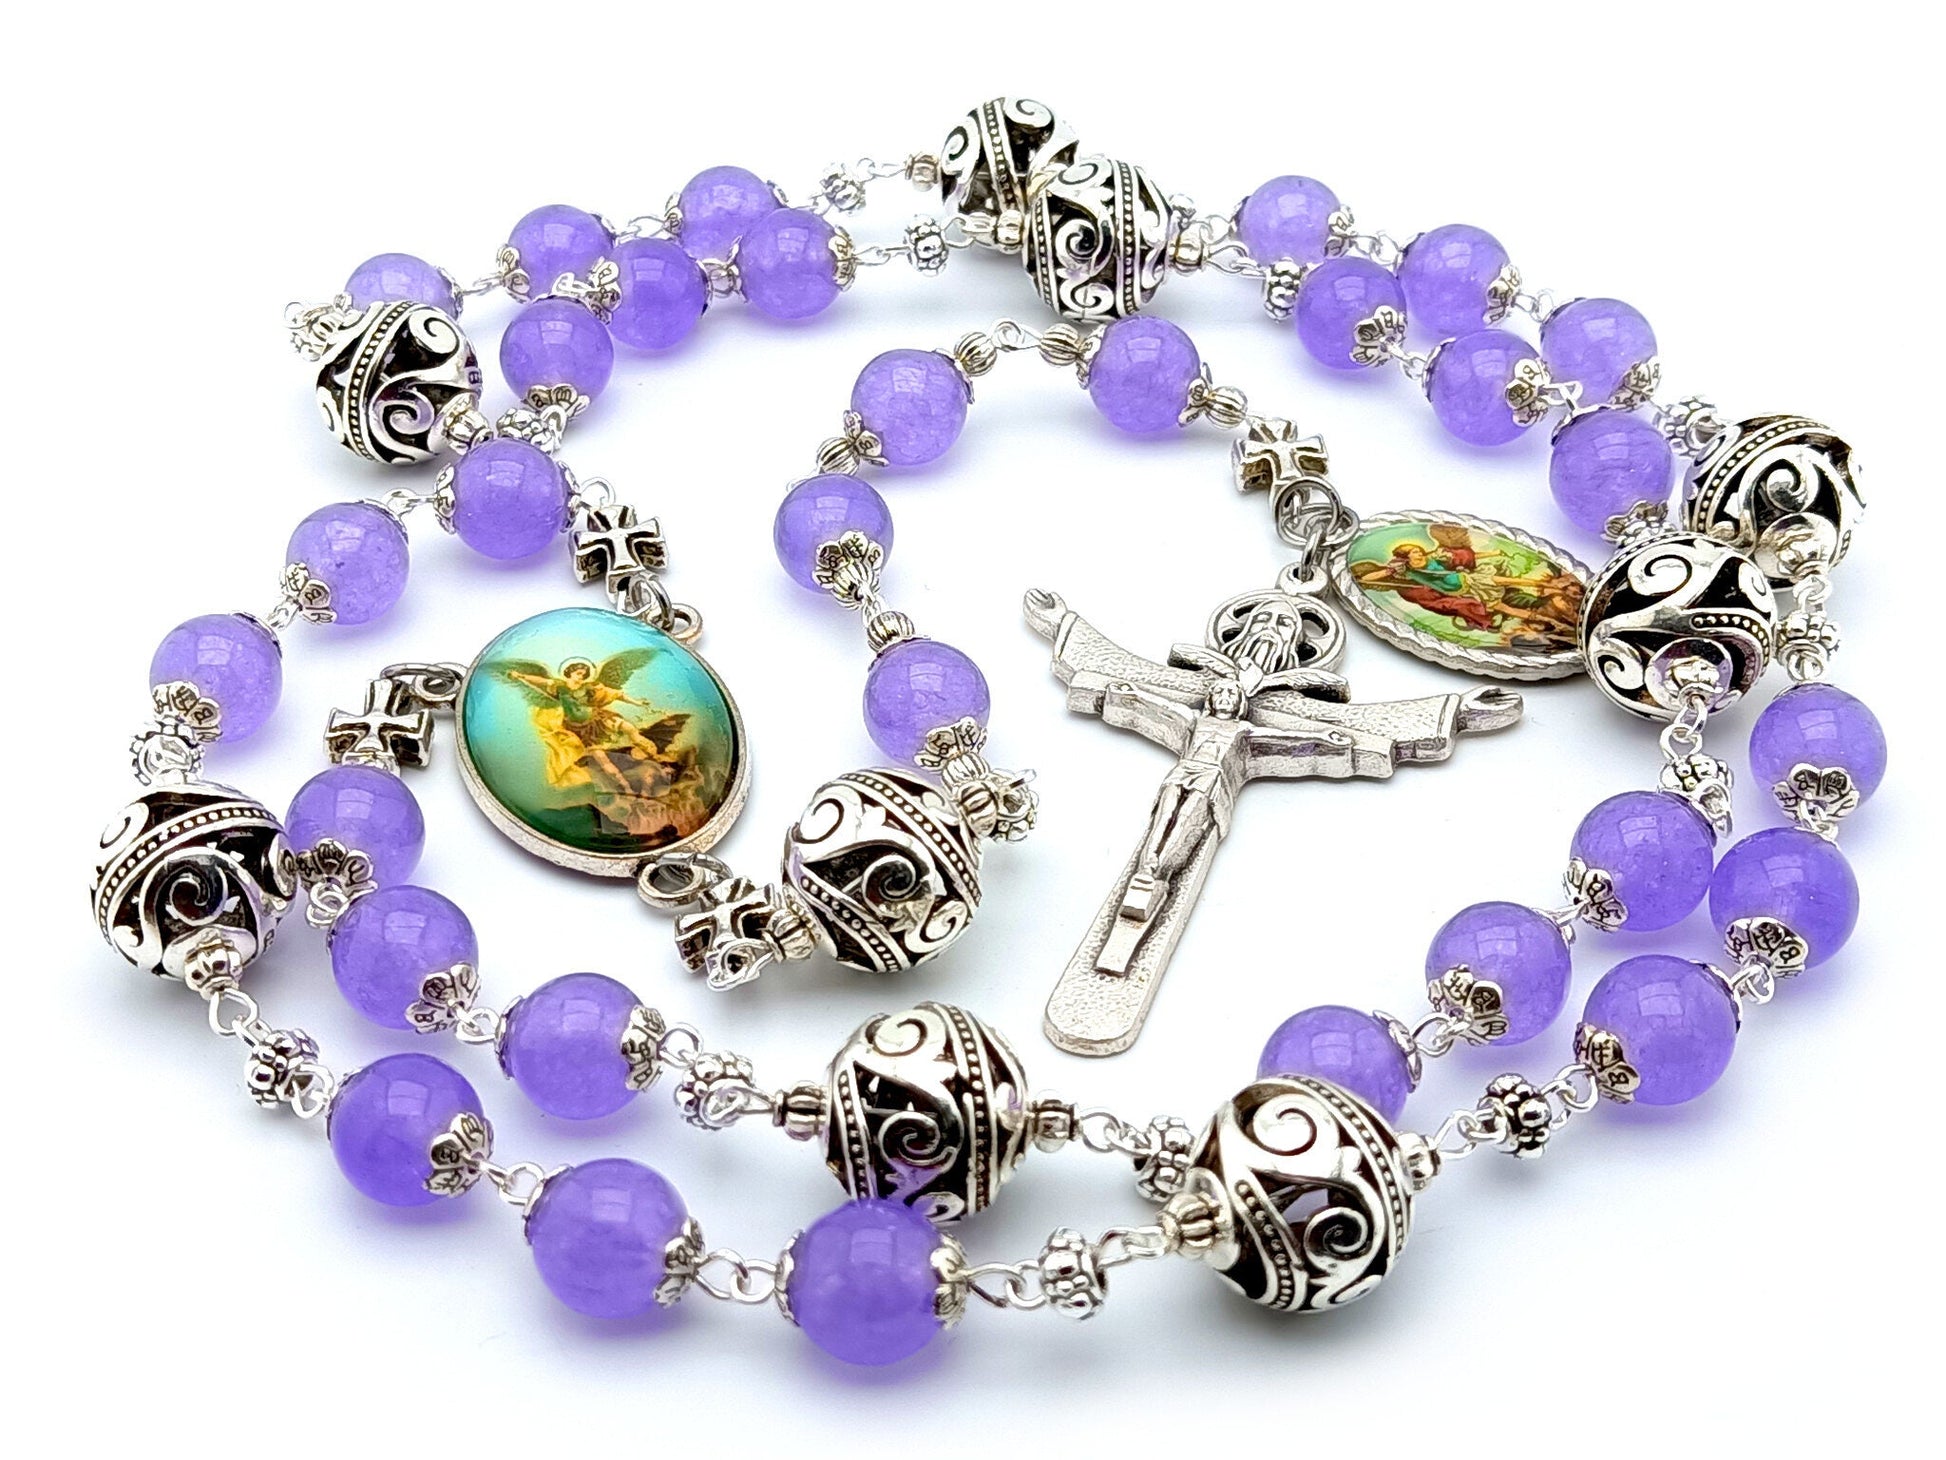 Saint Michael unique rosary beads prayer chaplet with alexandrite gemstone beads, silver pater beads, Trinity crucifix and picture centre medal.